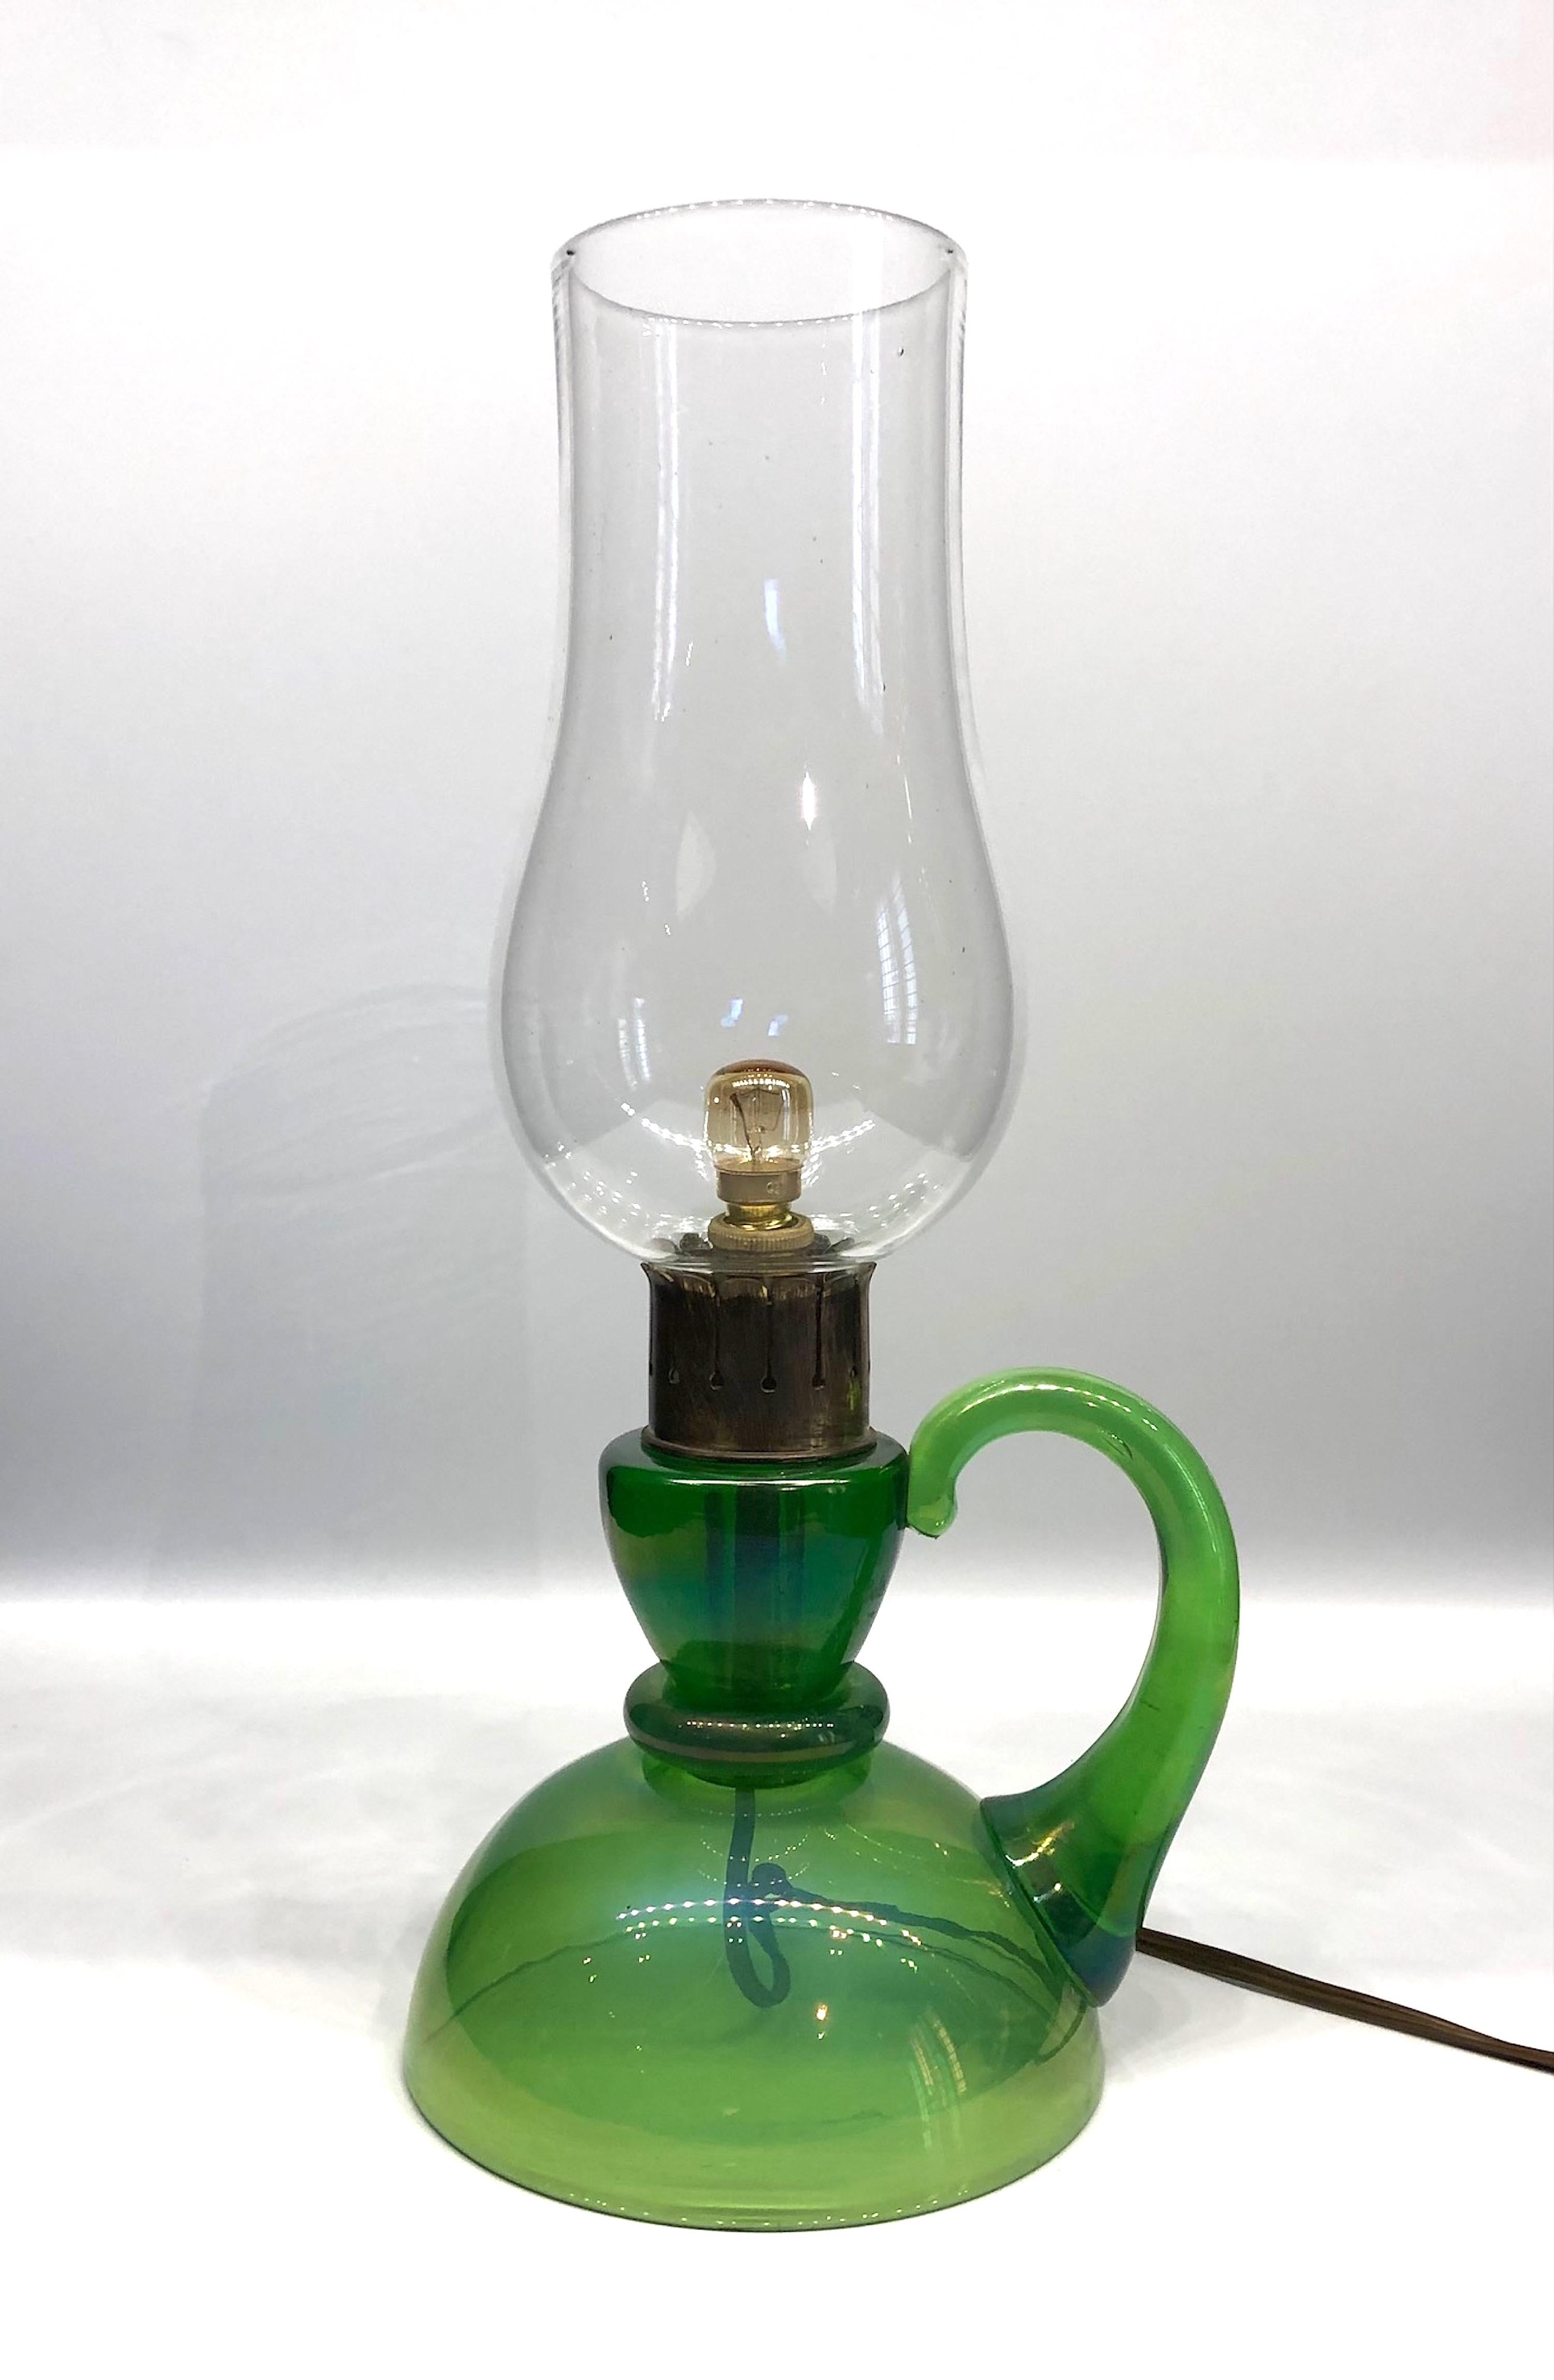 A wonderful and rare 1940s Murano, Italy glass table lamp attributed to the famous glass house of Barovier & Toso. The green glass base and clear glass shade are hand blown with the base having an applied handle. The connecting piece is brass. The